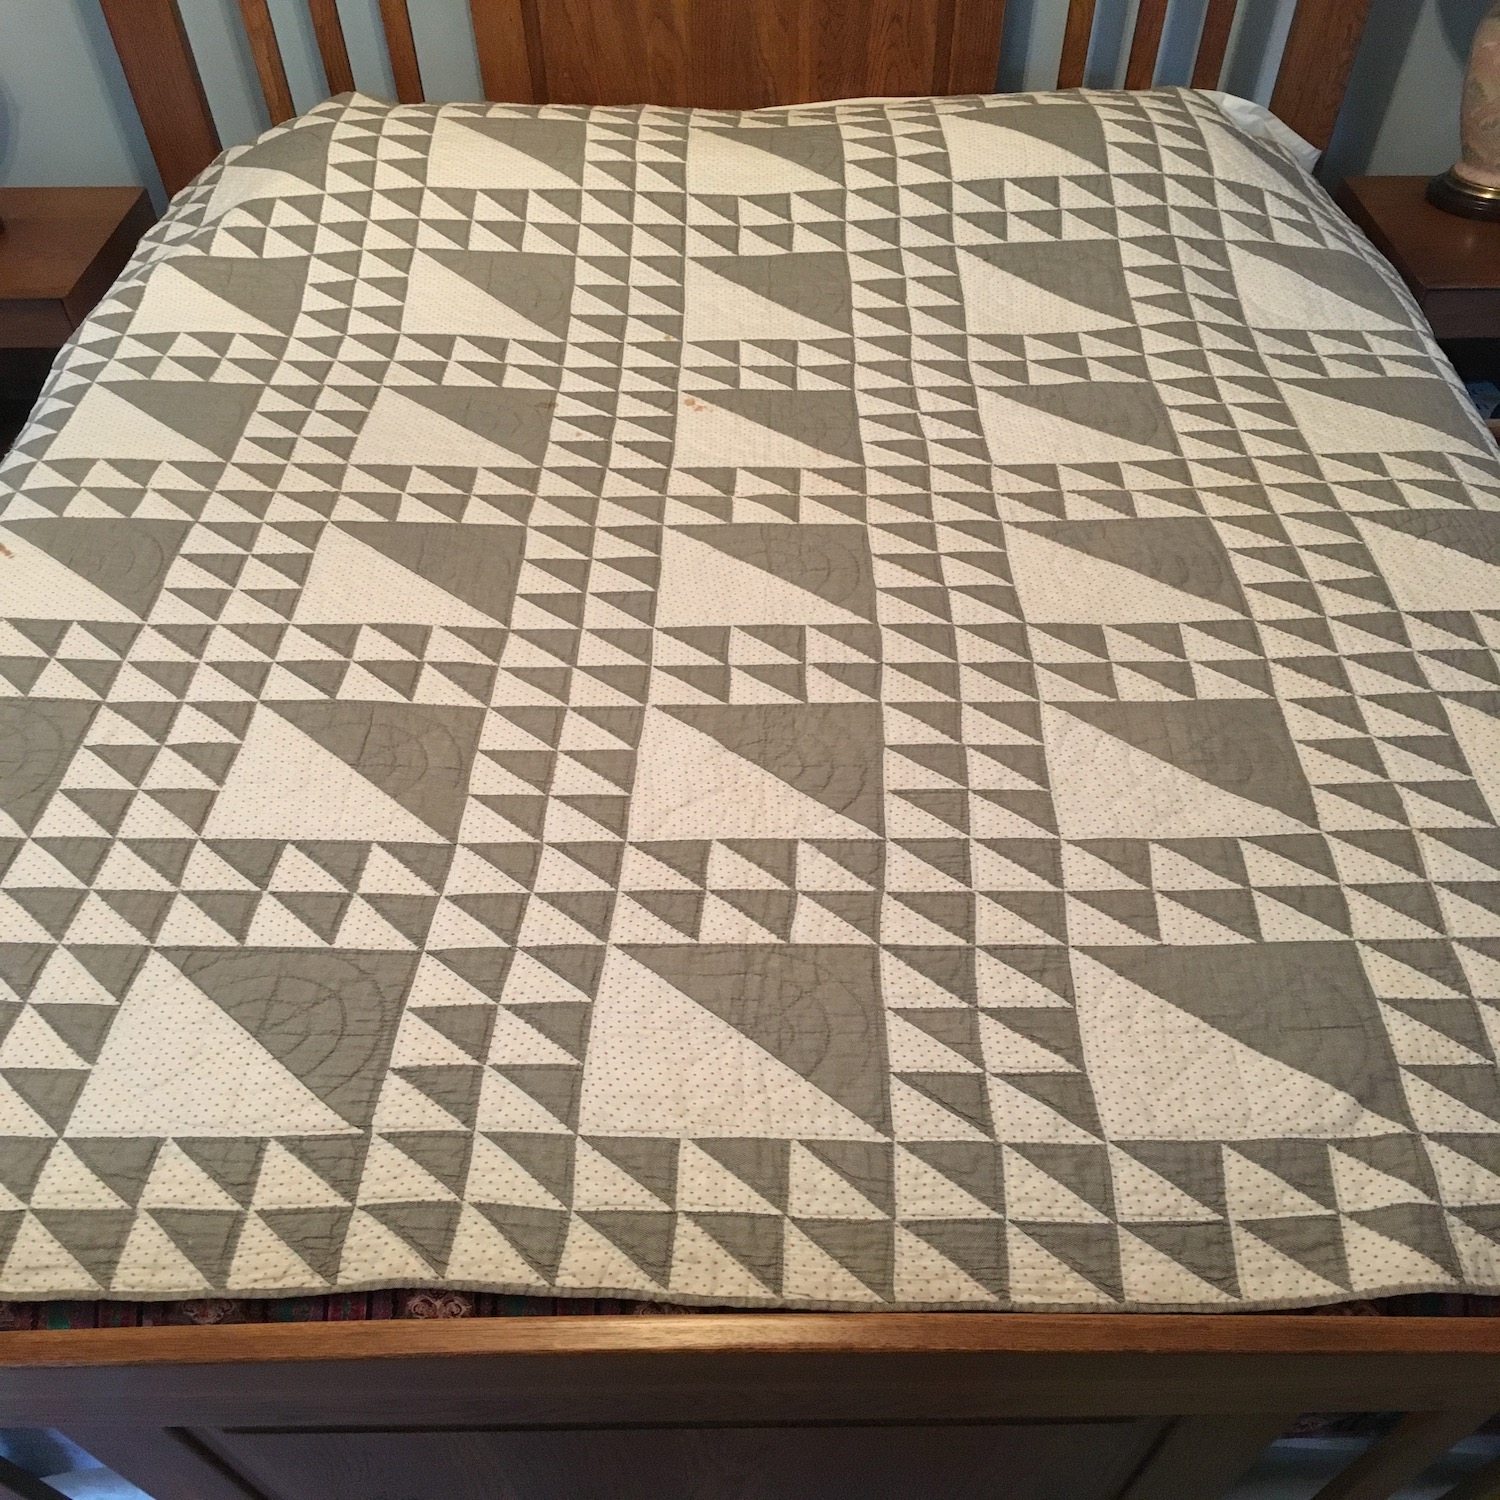 Lady of the Lake quilt